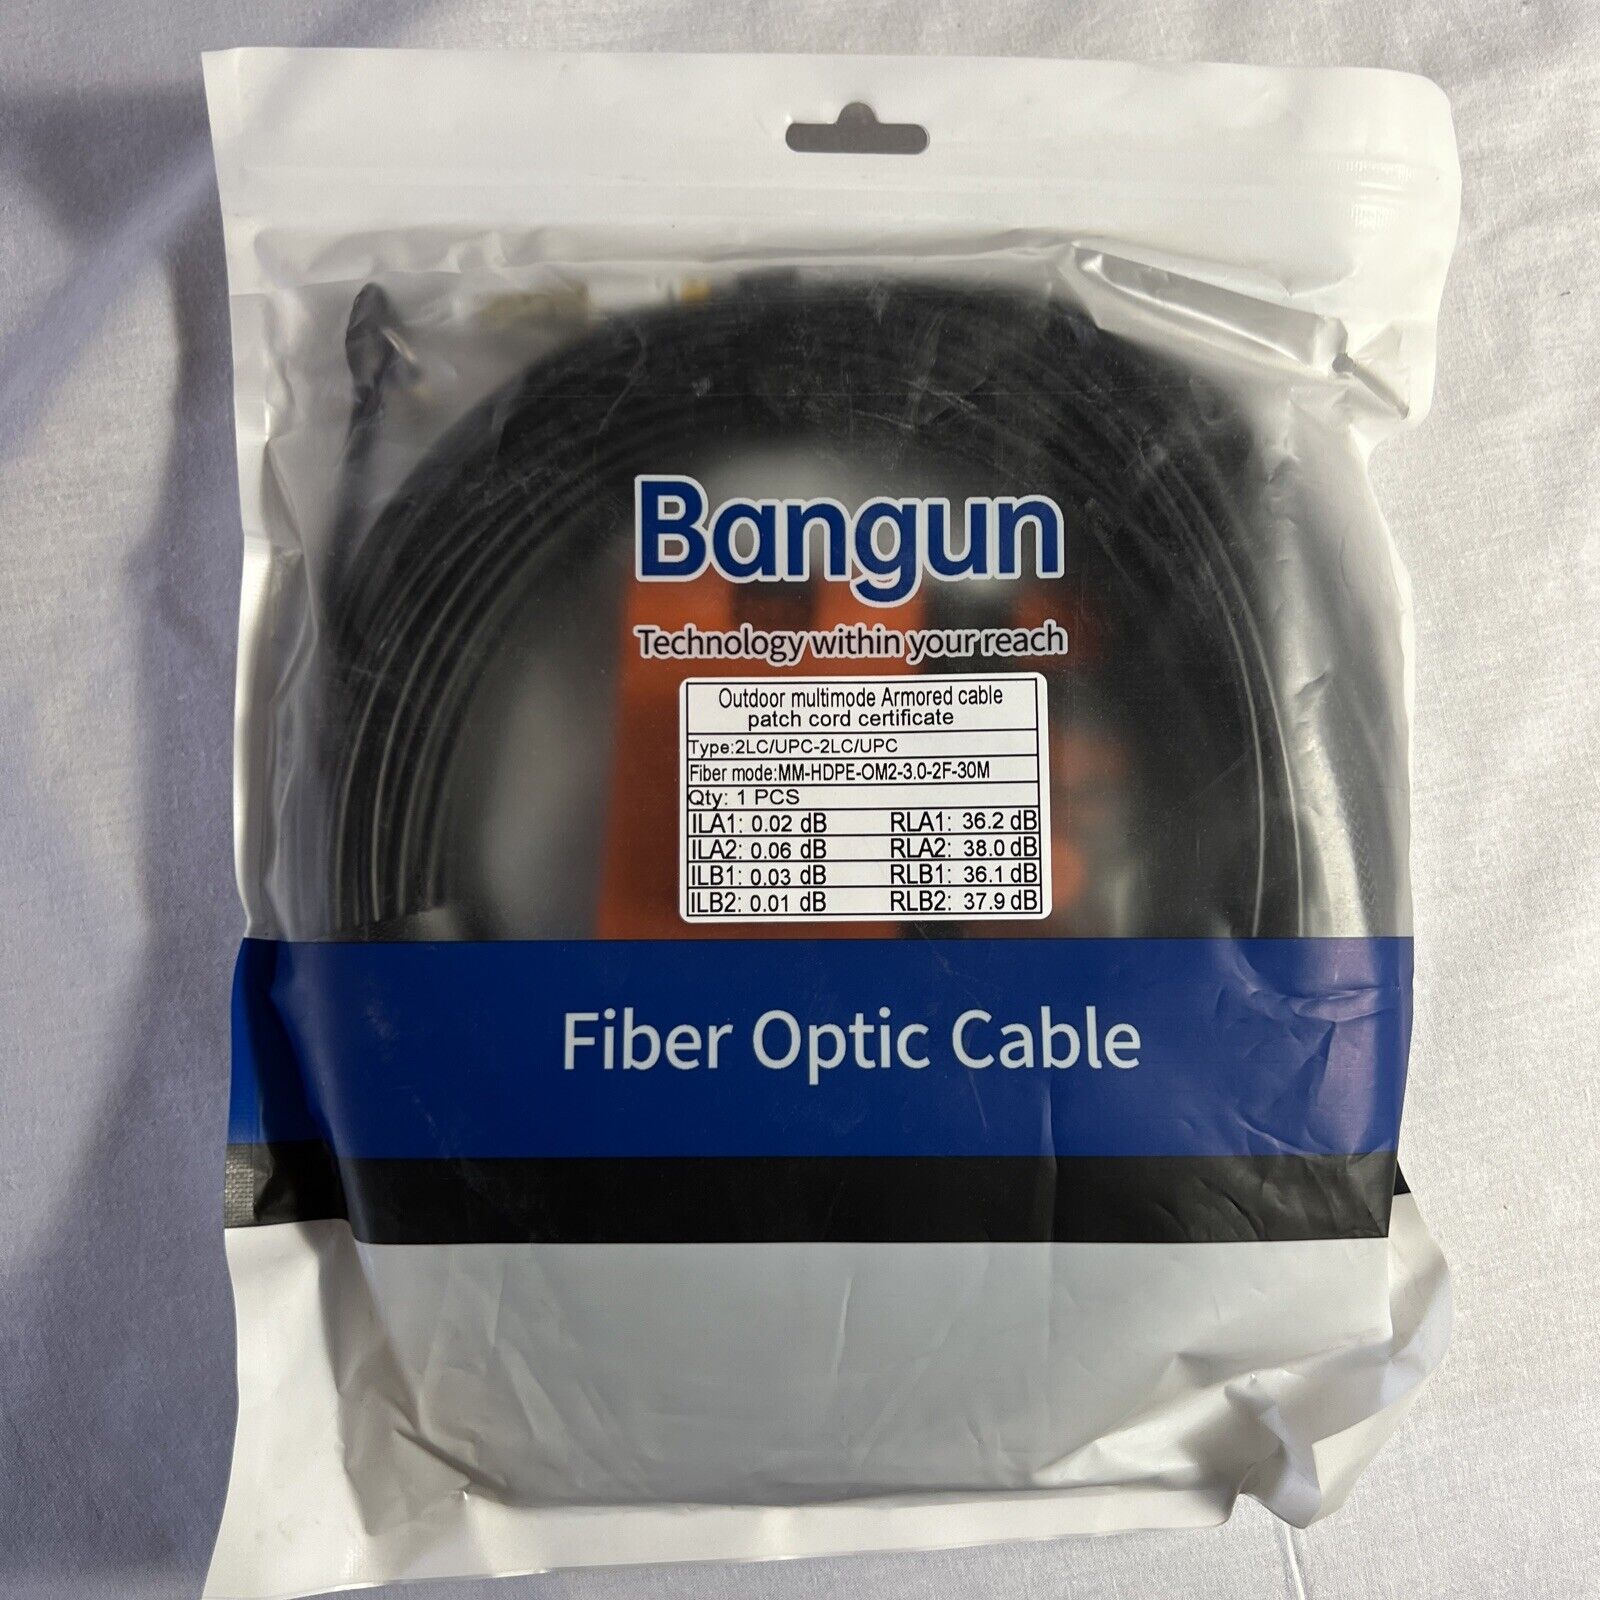 Bangun Fiber Optic Cable 100ft (30Meters), Outdoor Multimode Armored Cable New